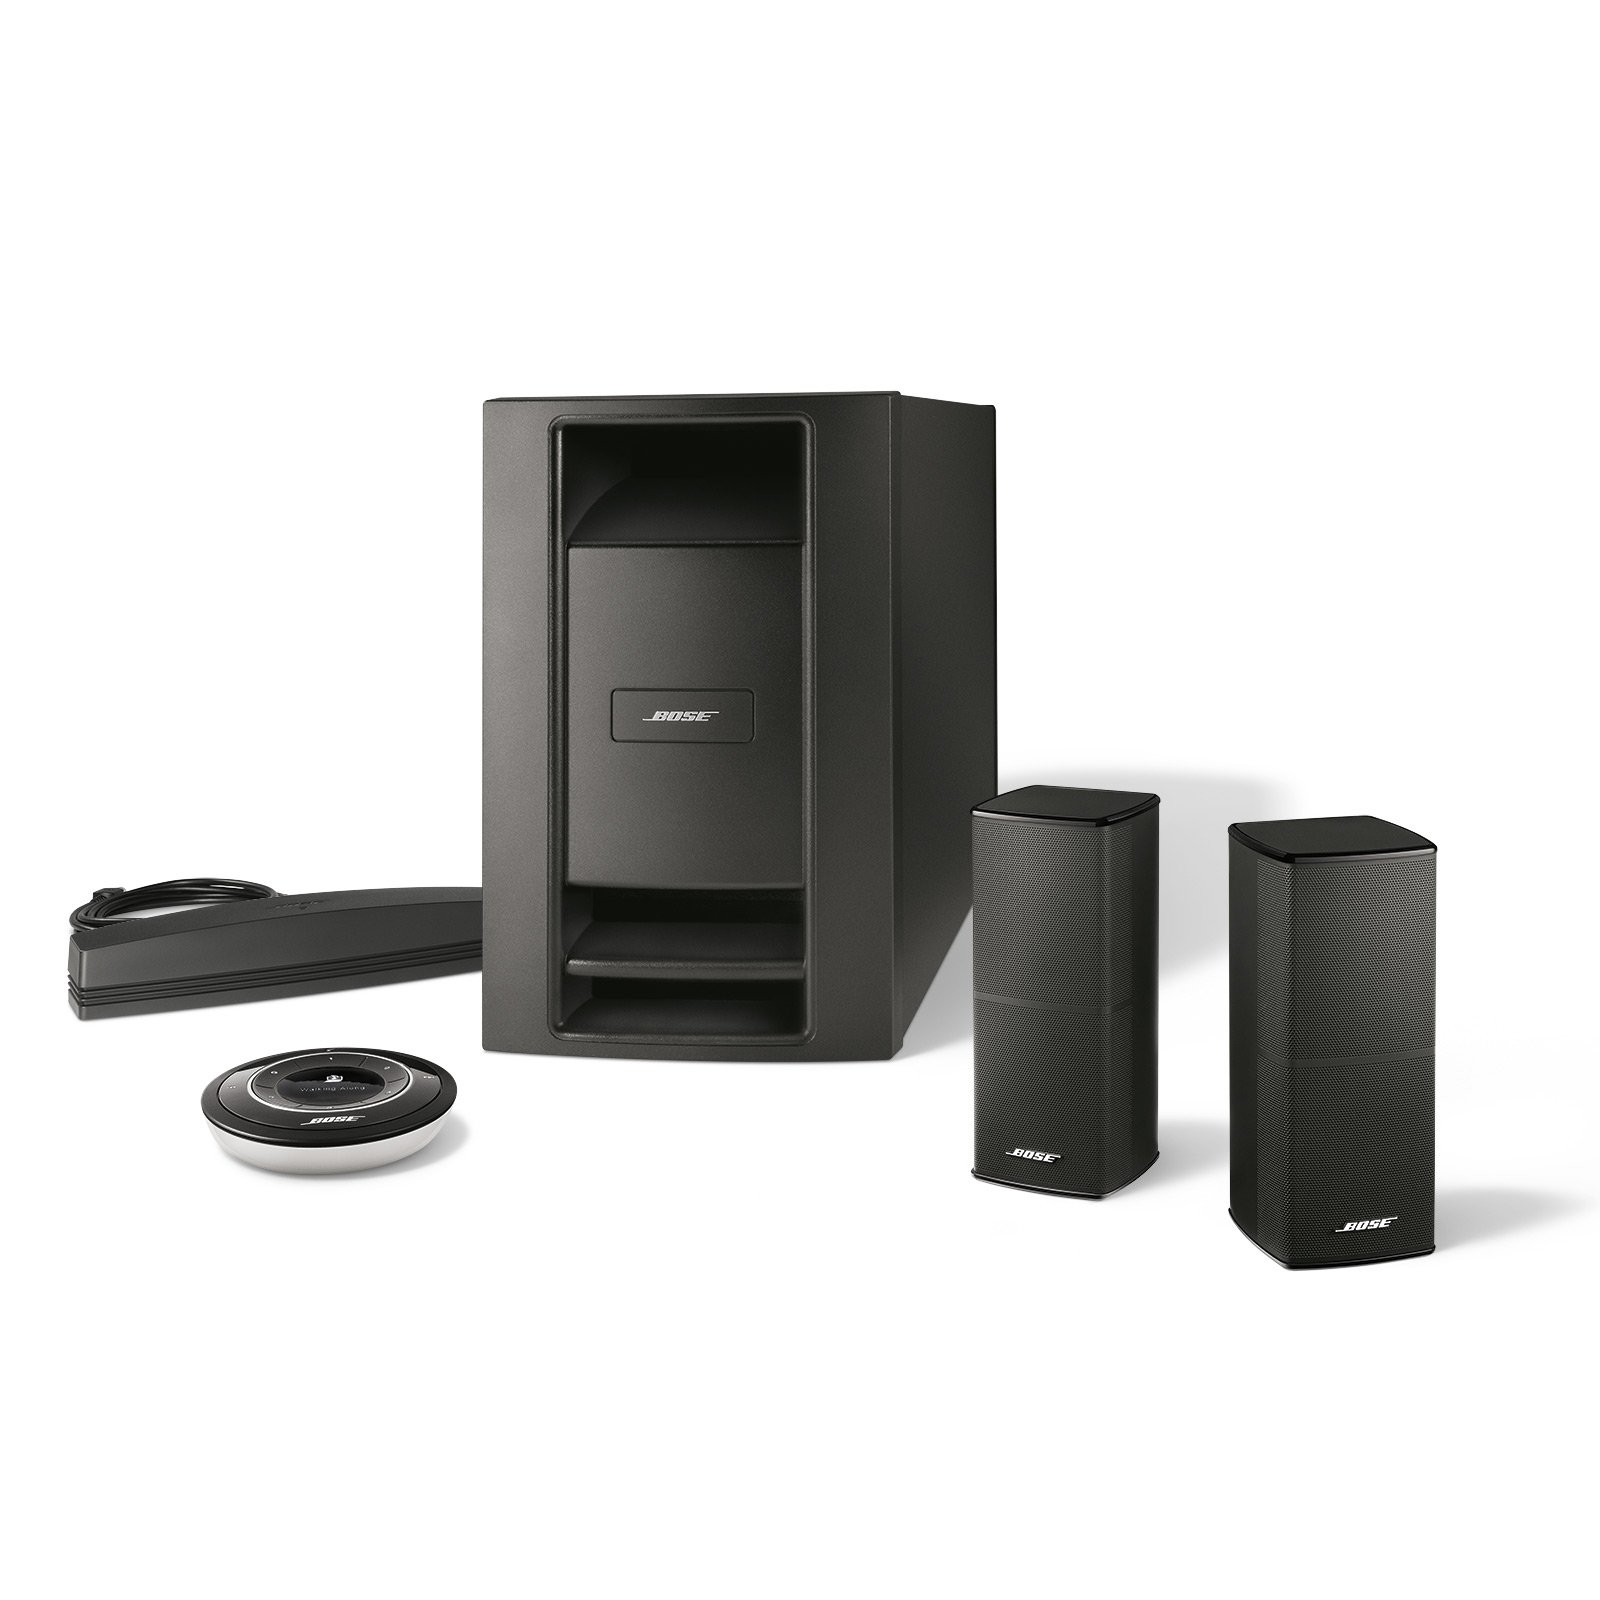 SoundTouch® Stereo JC Series II Wi-Fi® music system